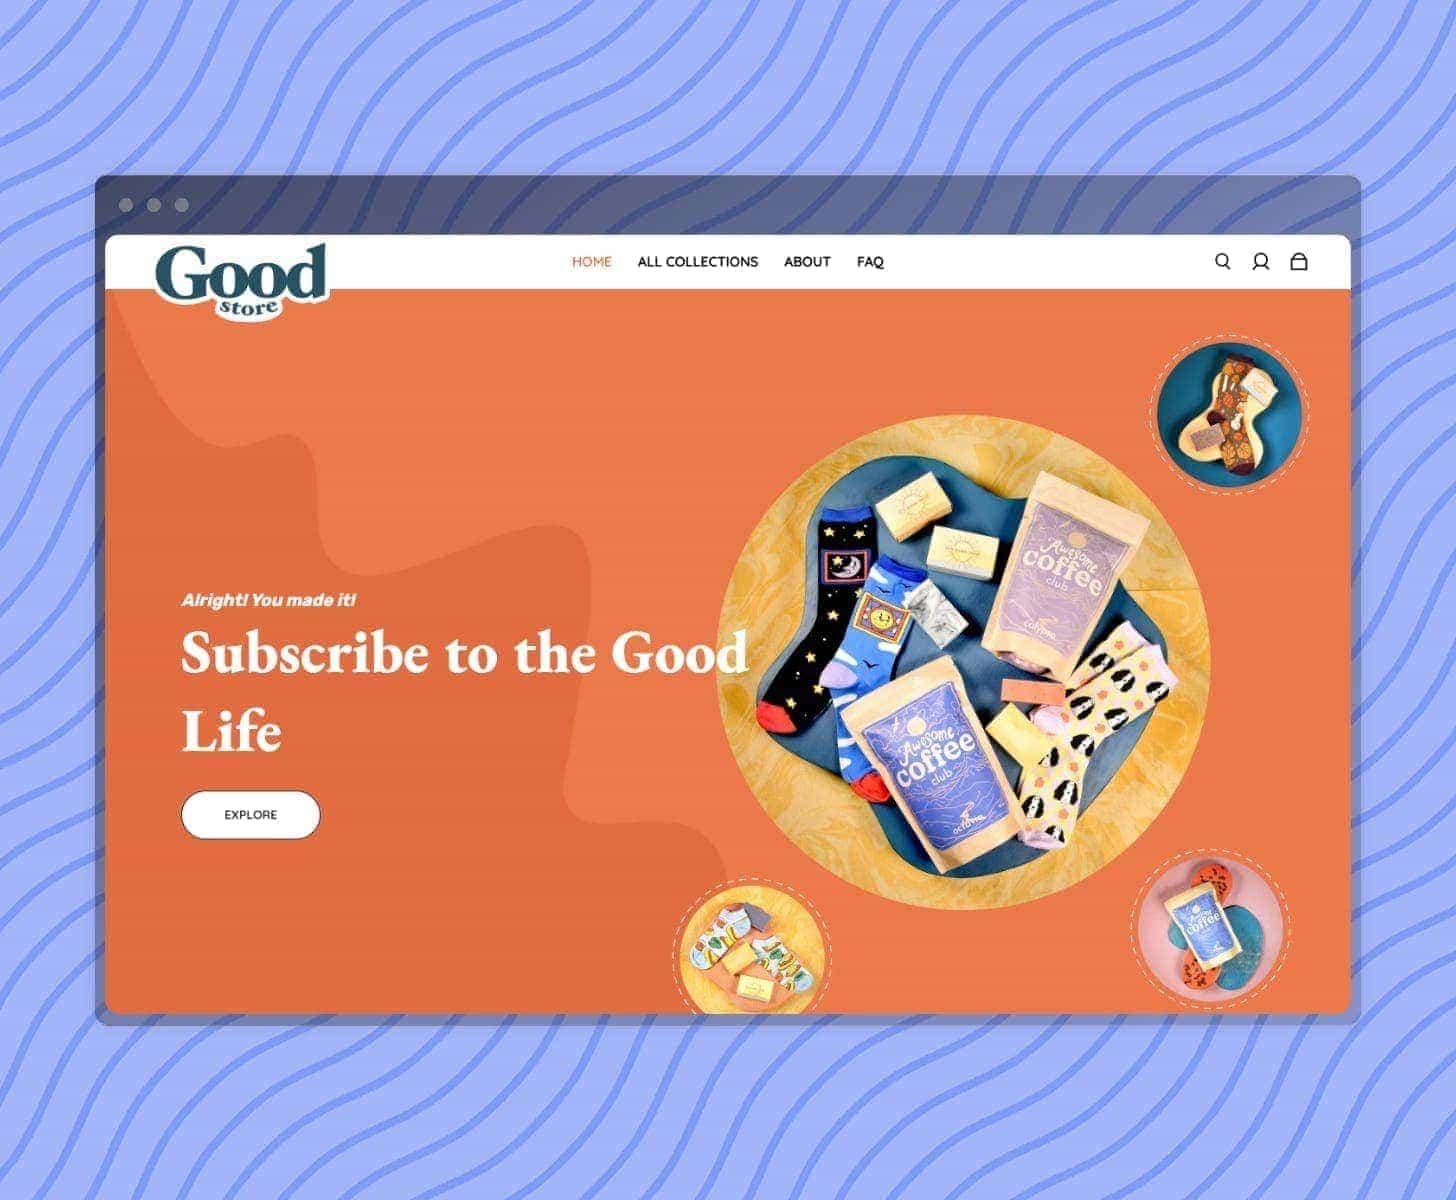 Good Store website: Alright! You made it! Subscribe to the Good Life